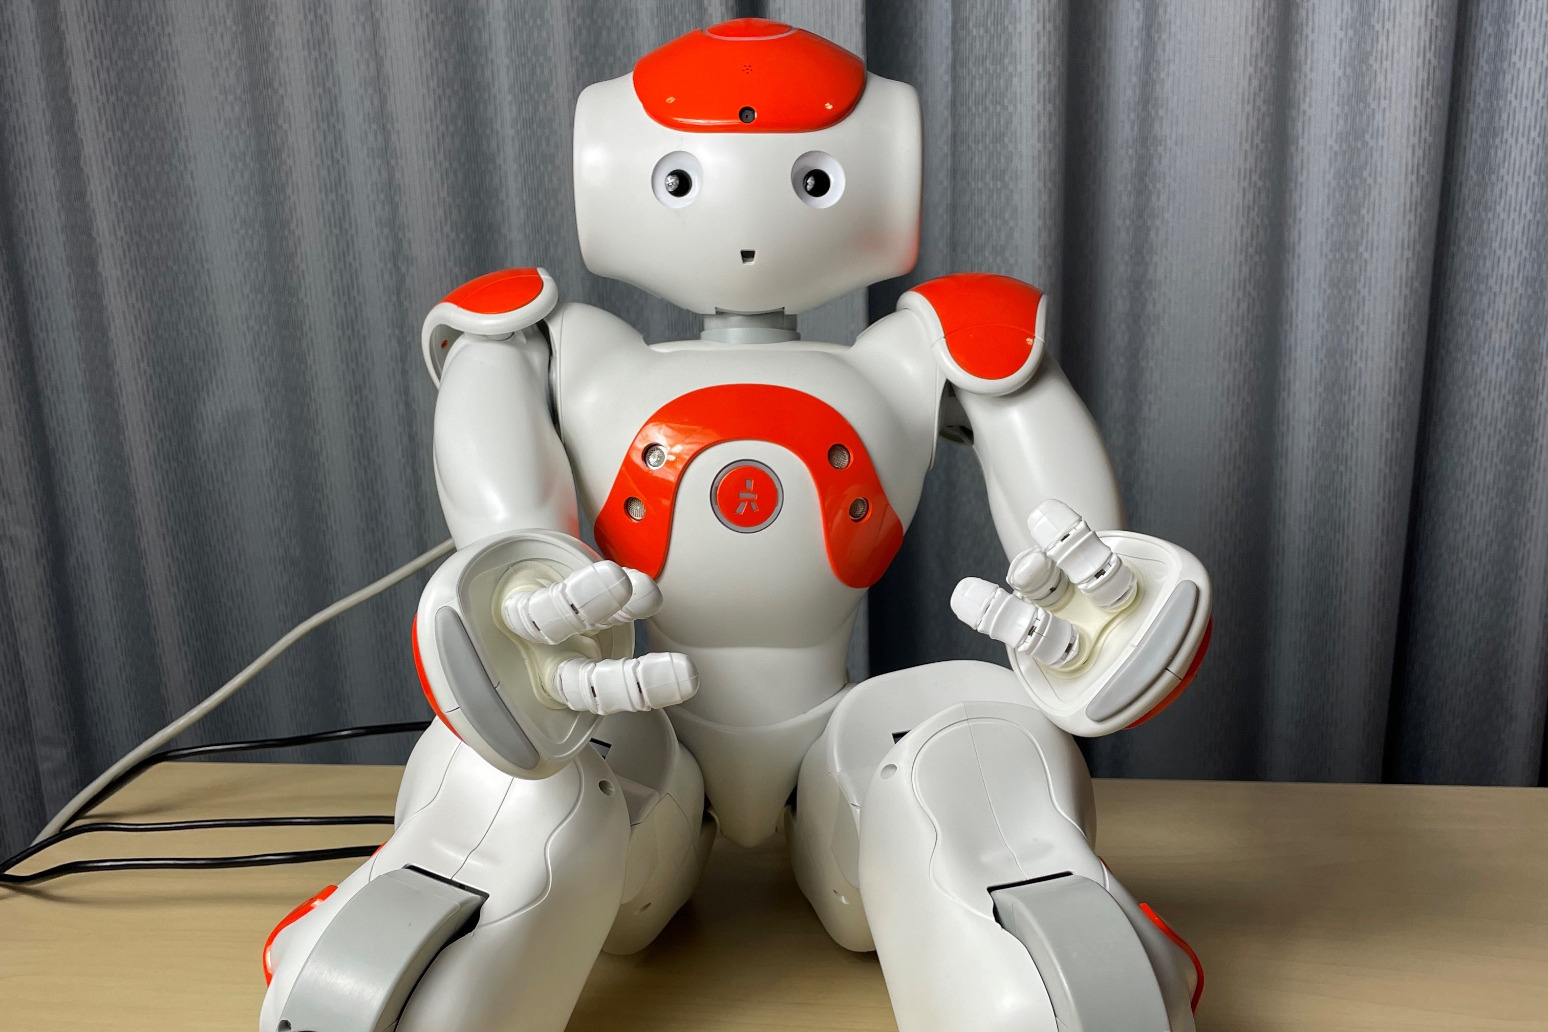 Robots could help to detect mental wellbeing issues in children 